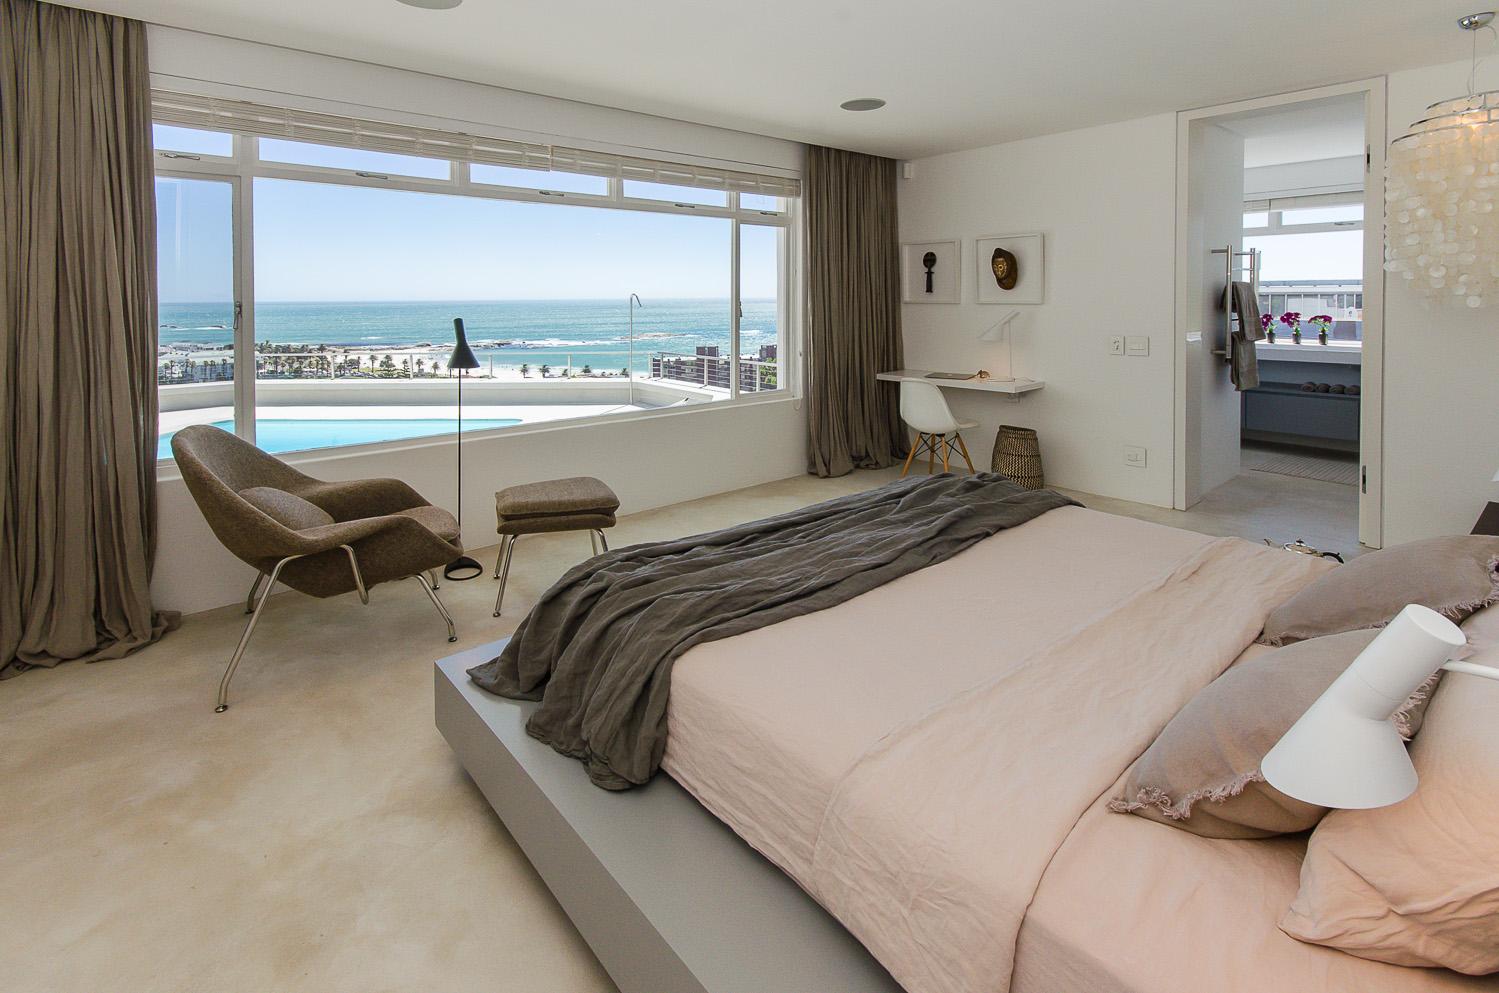 Photo 19 of Strathmore Dream accommodation in Camps Bay, Cape Town with 4 bedrooms and 3 bathrooms